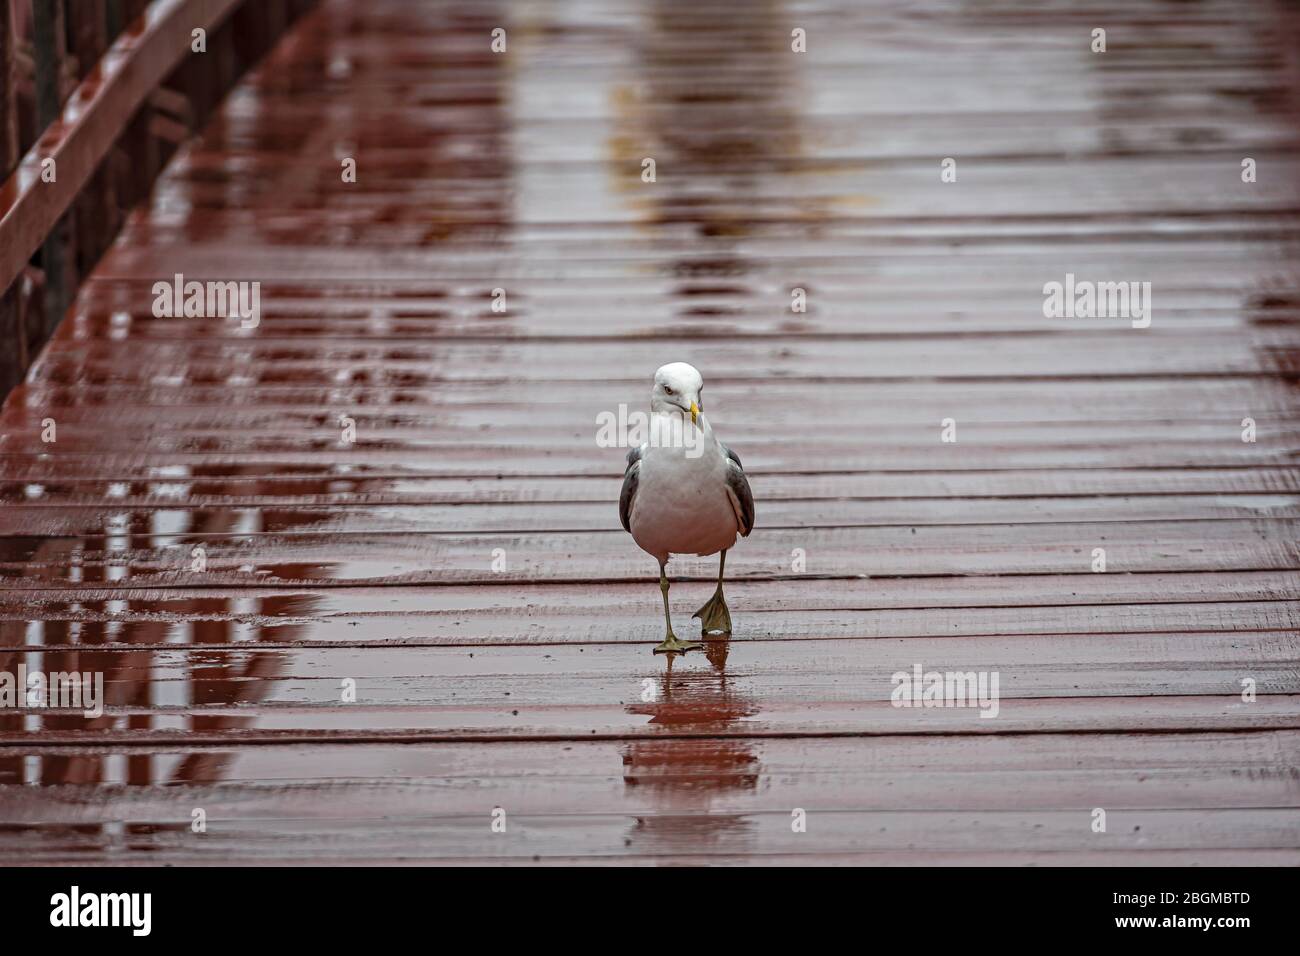 seagull on a brown-painted, wet wooden footbridge, animal close-up Stock Photo